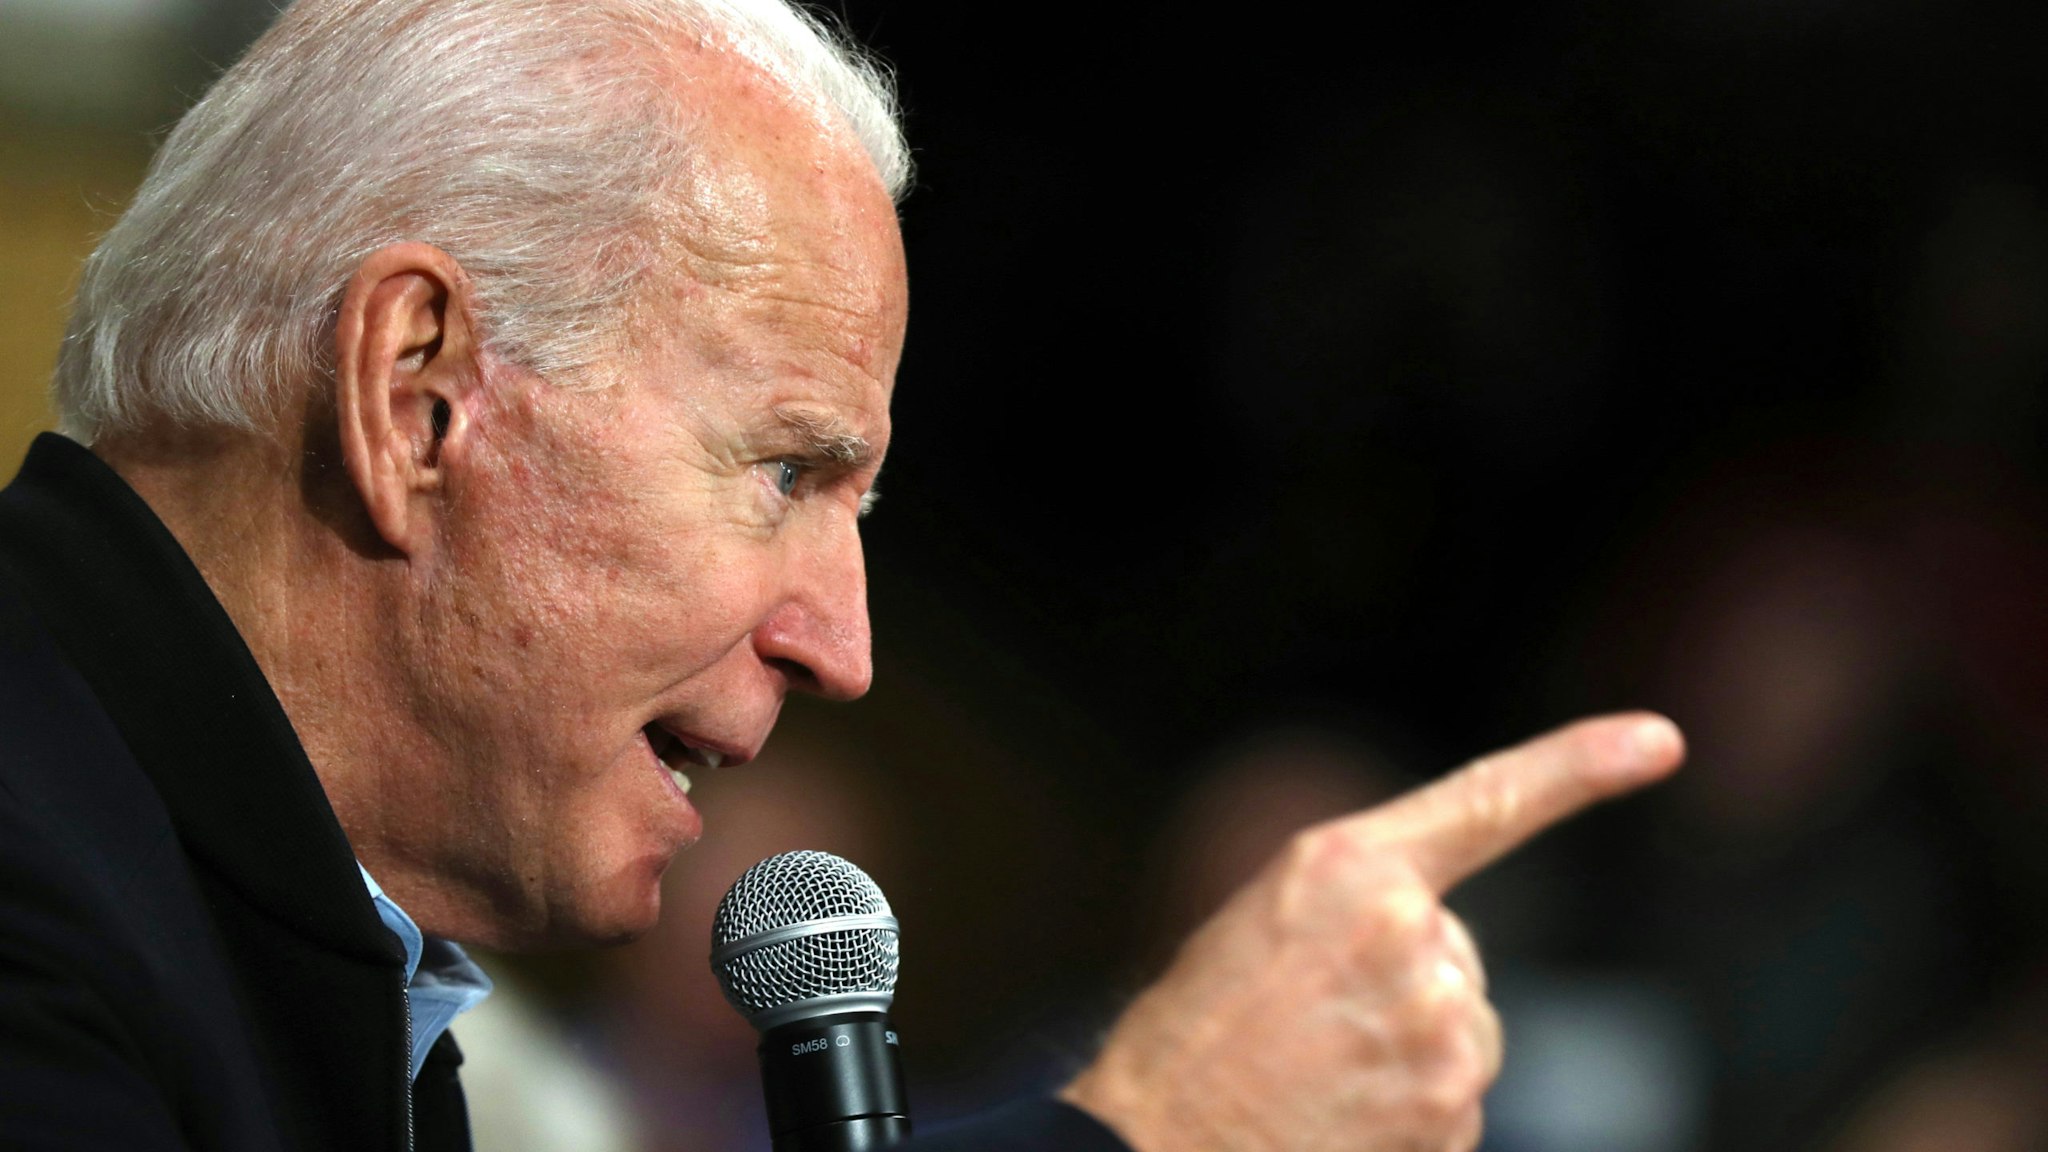 CEDAR RAPIDS, IOWA - FEBRUARY 01: Democratic presidential candidate former Vice President Joe Biden speaks during a campaign event on February 01, 2020 in Cedar Rapids, Iowa. With two days to go before the 2020 Iowa Presidential caucuses, Joe Biden is campaigning across Iowa.